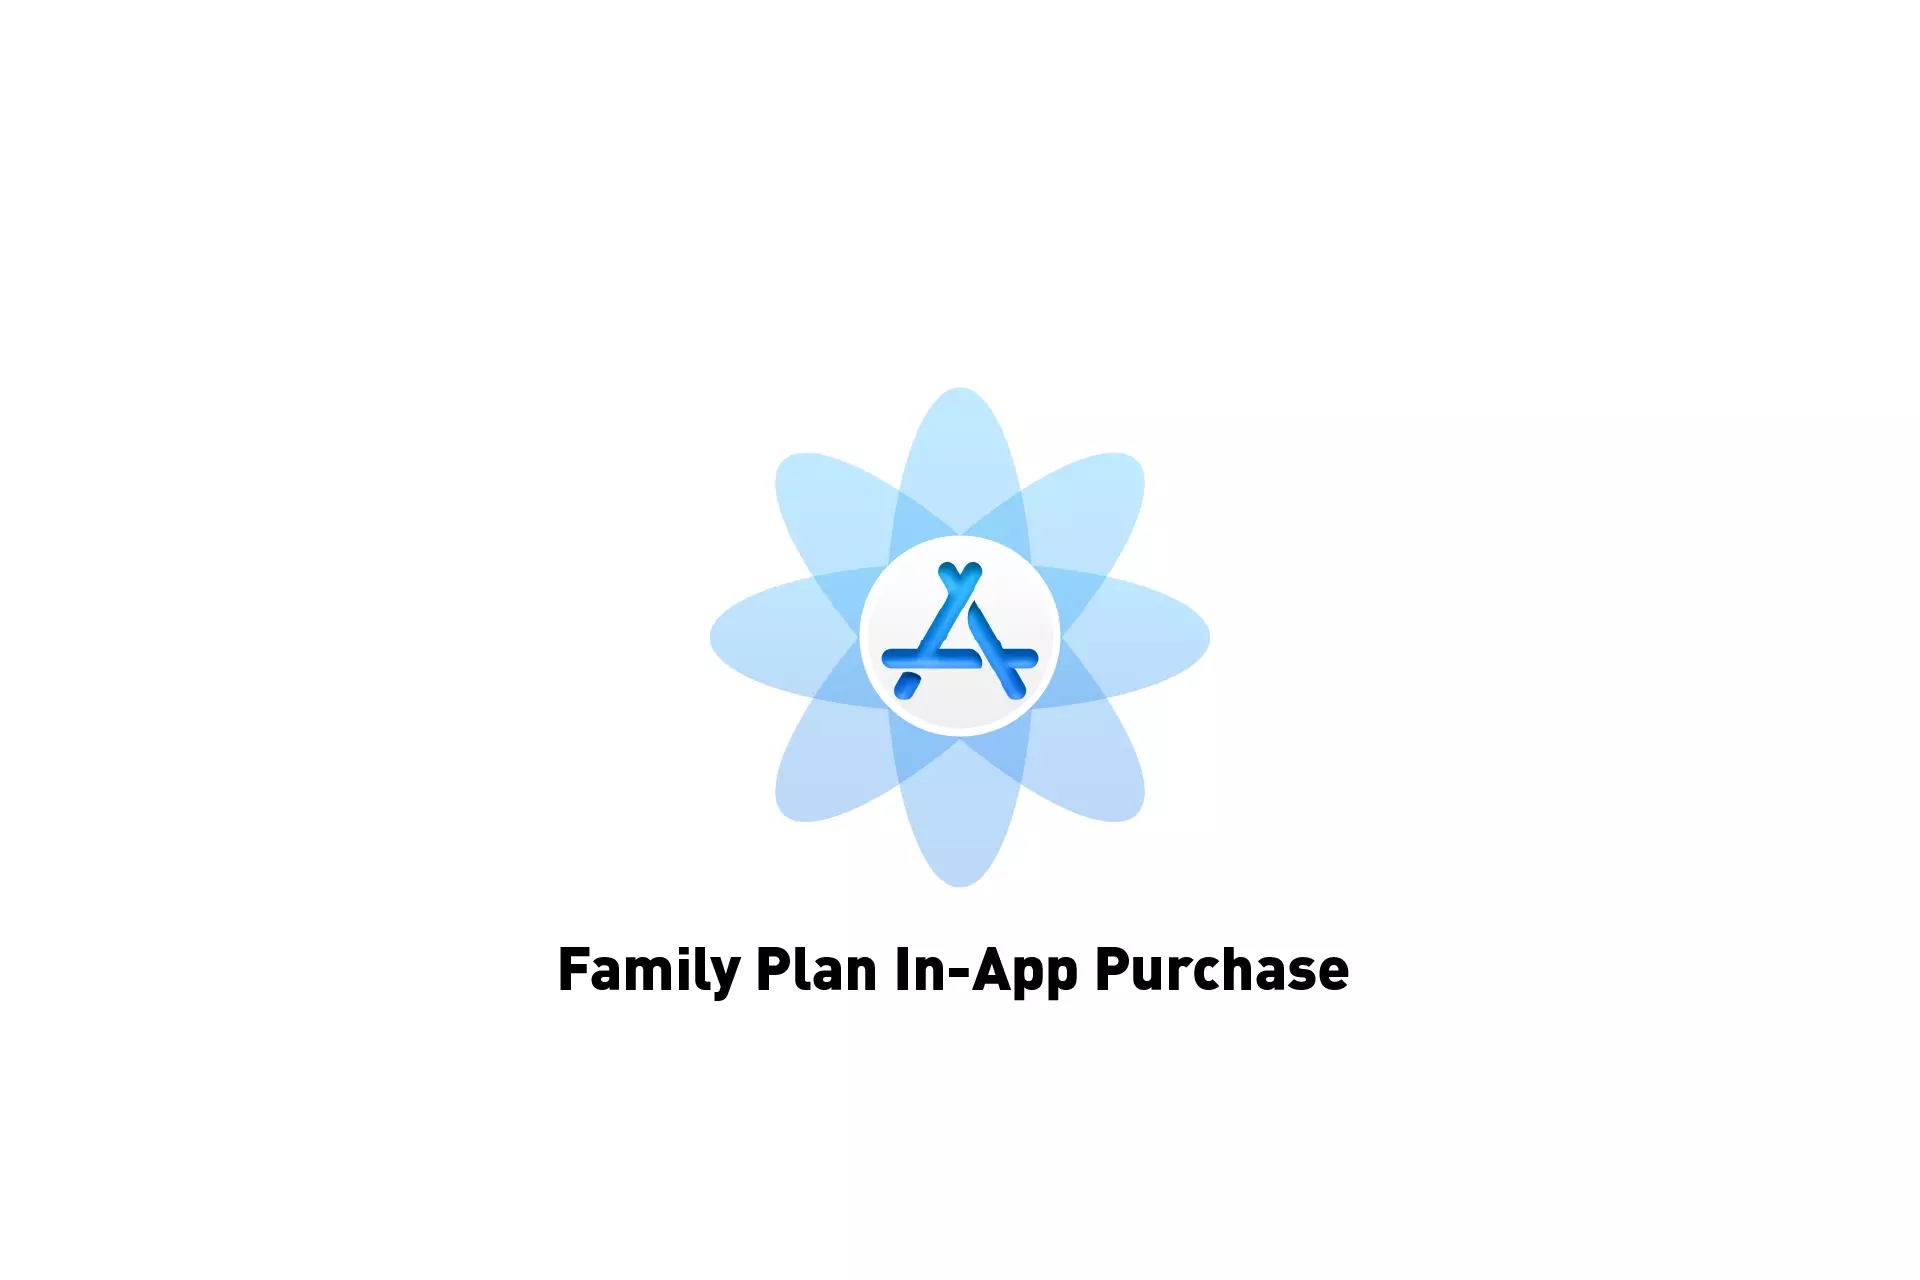 A flower that represents App Store Connect with the text "Family Plan In-App Purchase."